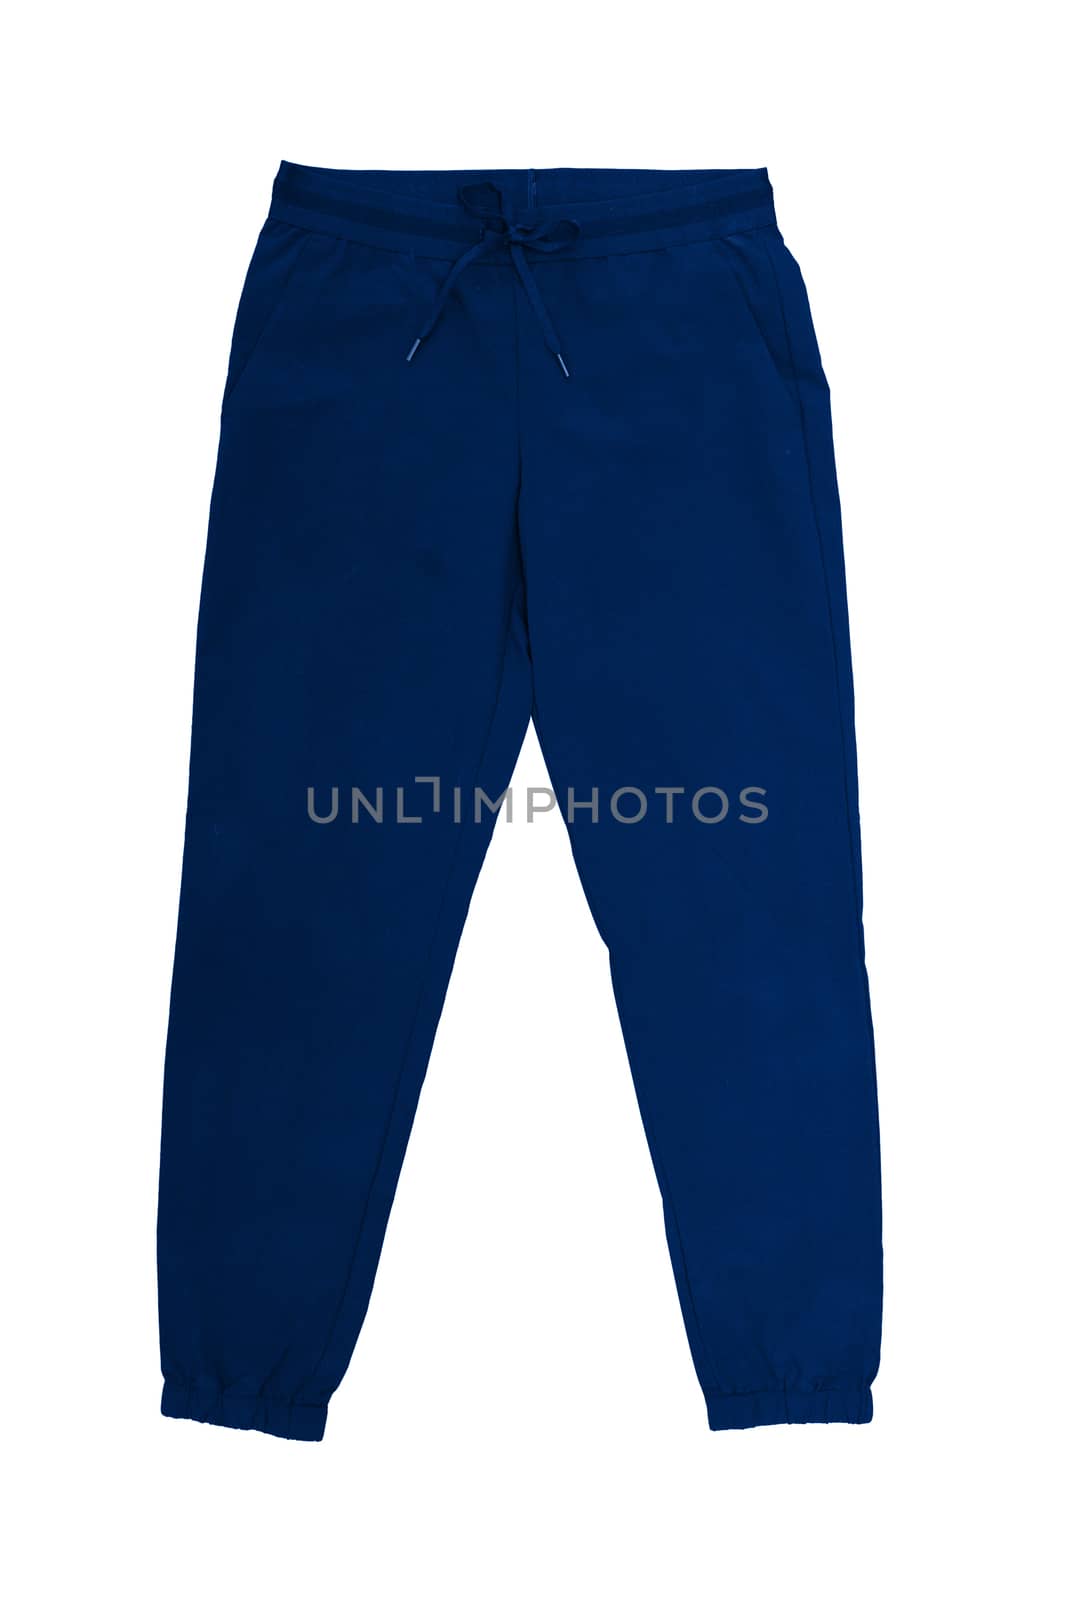 isolated warm blue fleece pants on white background by Charnsitr